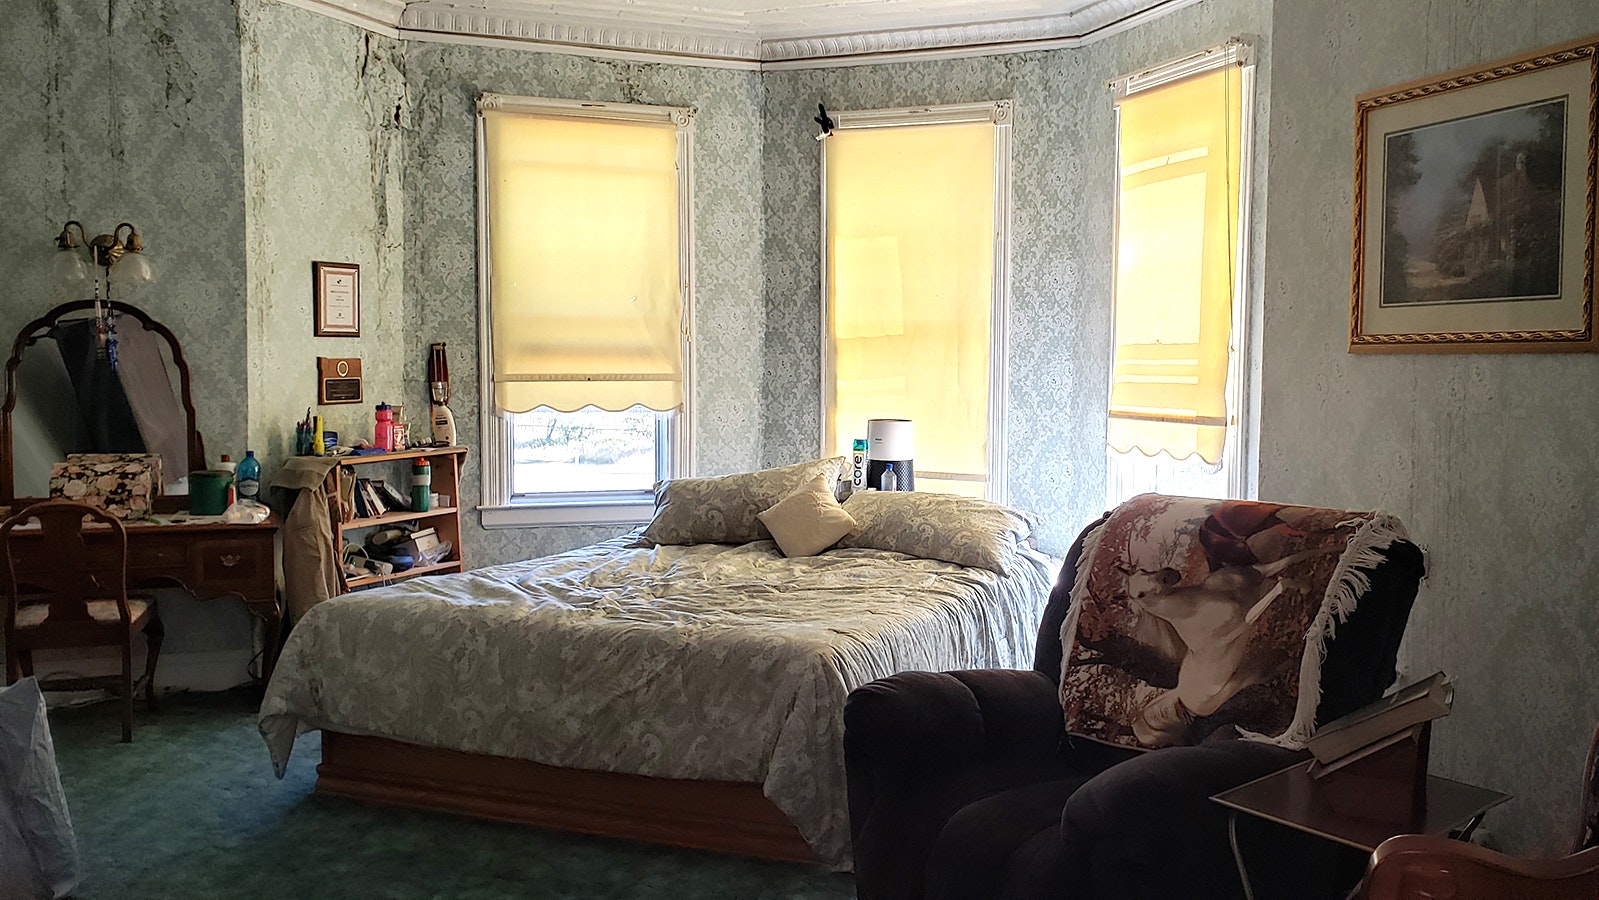 The master bedroom at the J.B. Okie Mansion.